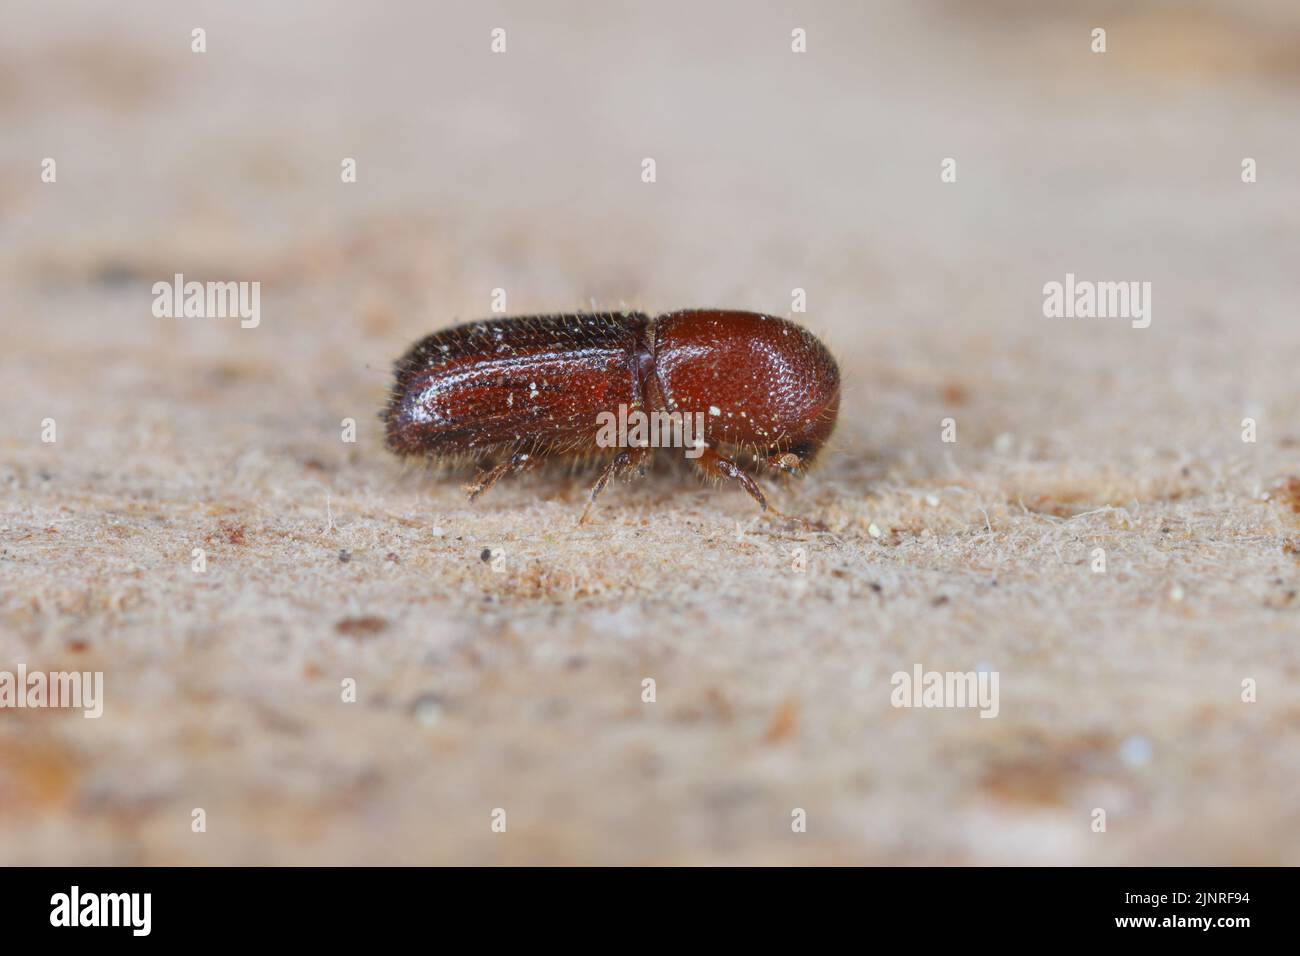 Detail shot of a bark beetle (Scolytidae, Scolytinae) on wooden surface. Stock Photo